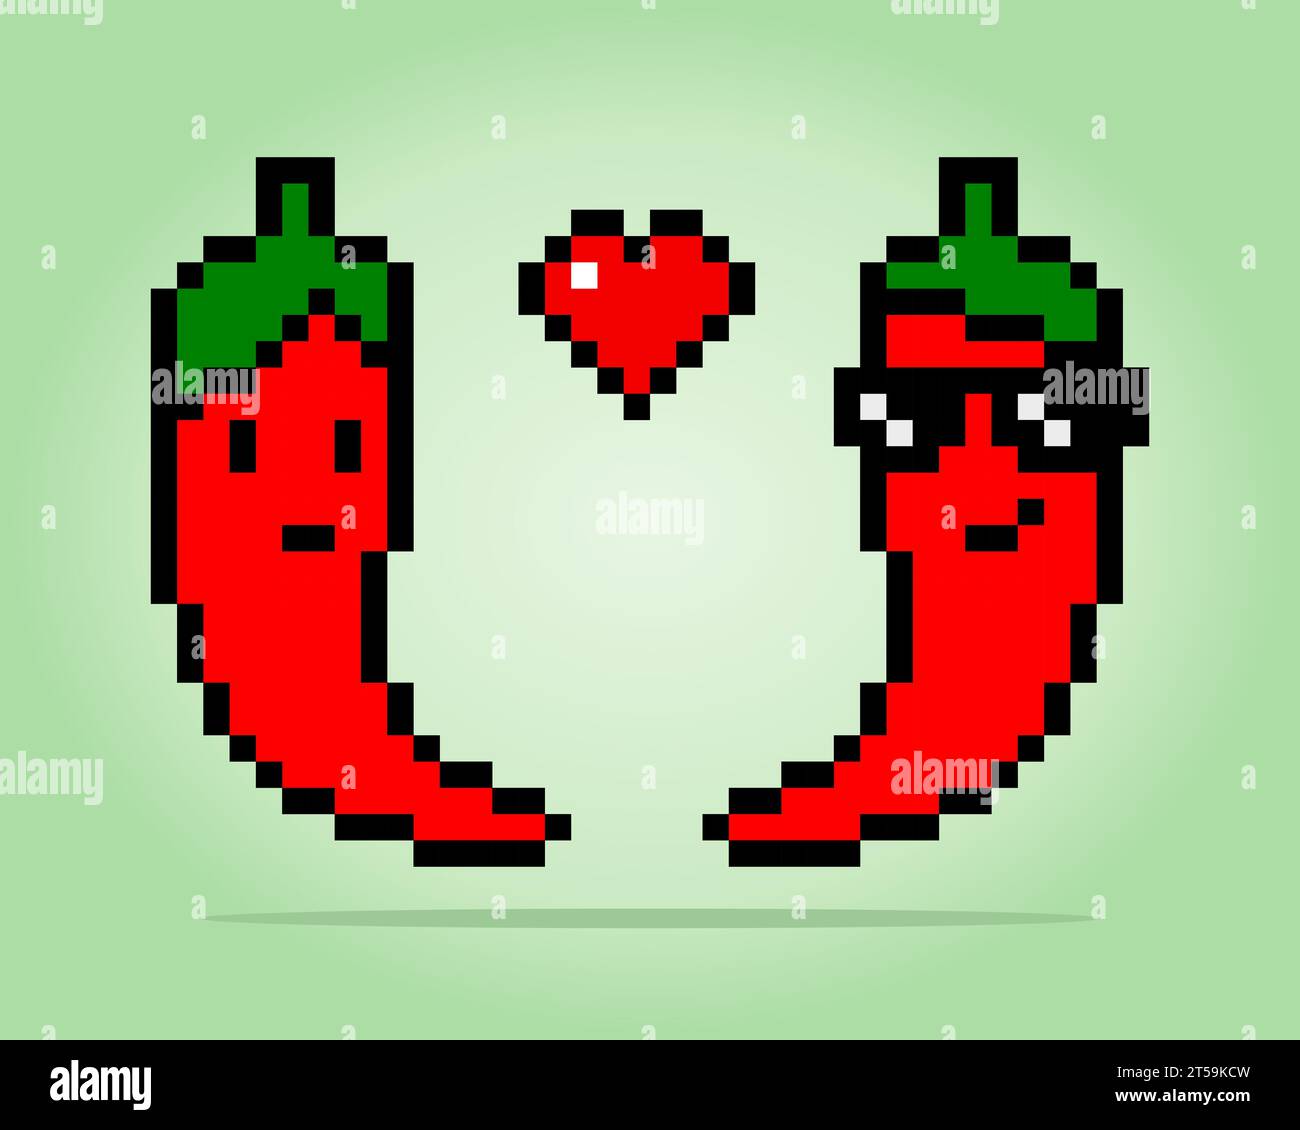 8 bit pixels a chili pair falling love. Vegetable icon for game assets and cross stitch patterns in vector illustrations. Stock Vector